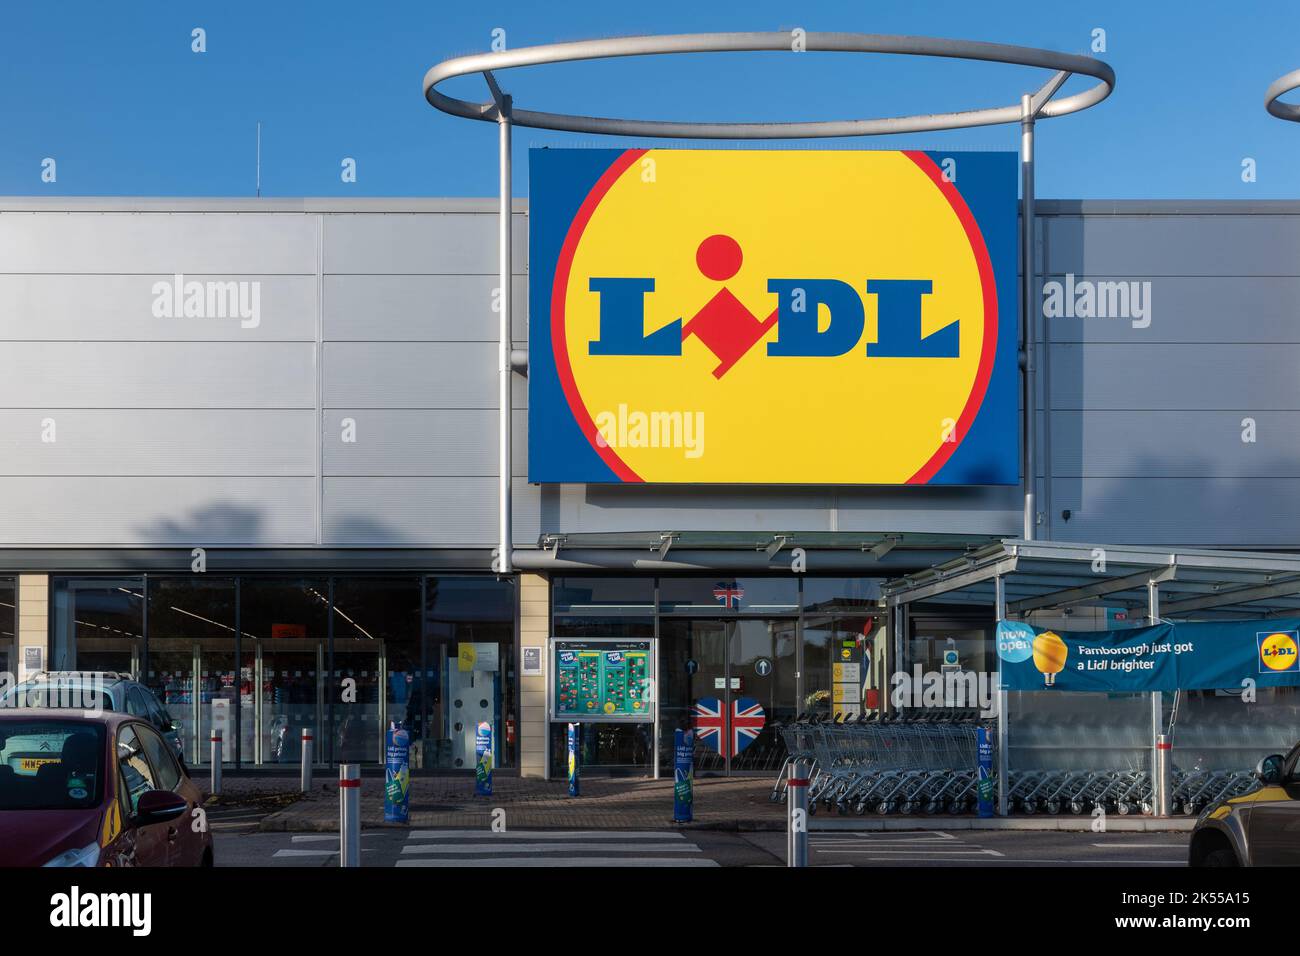 Lidl supermarket and sign, new Lidl store in Farnborough, Hampshire, England, UK Stock Photo